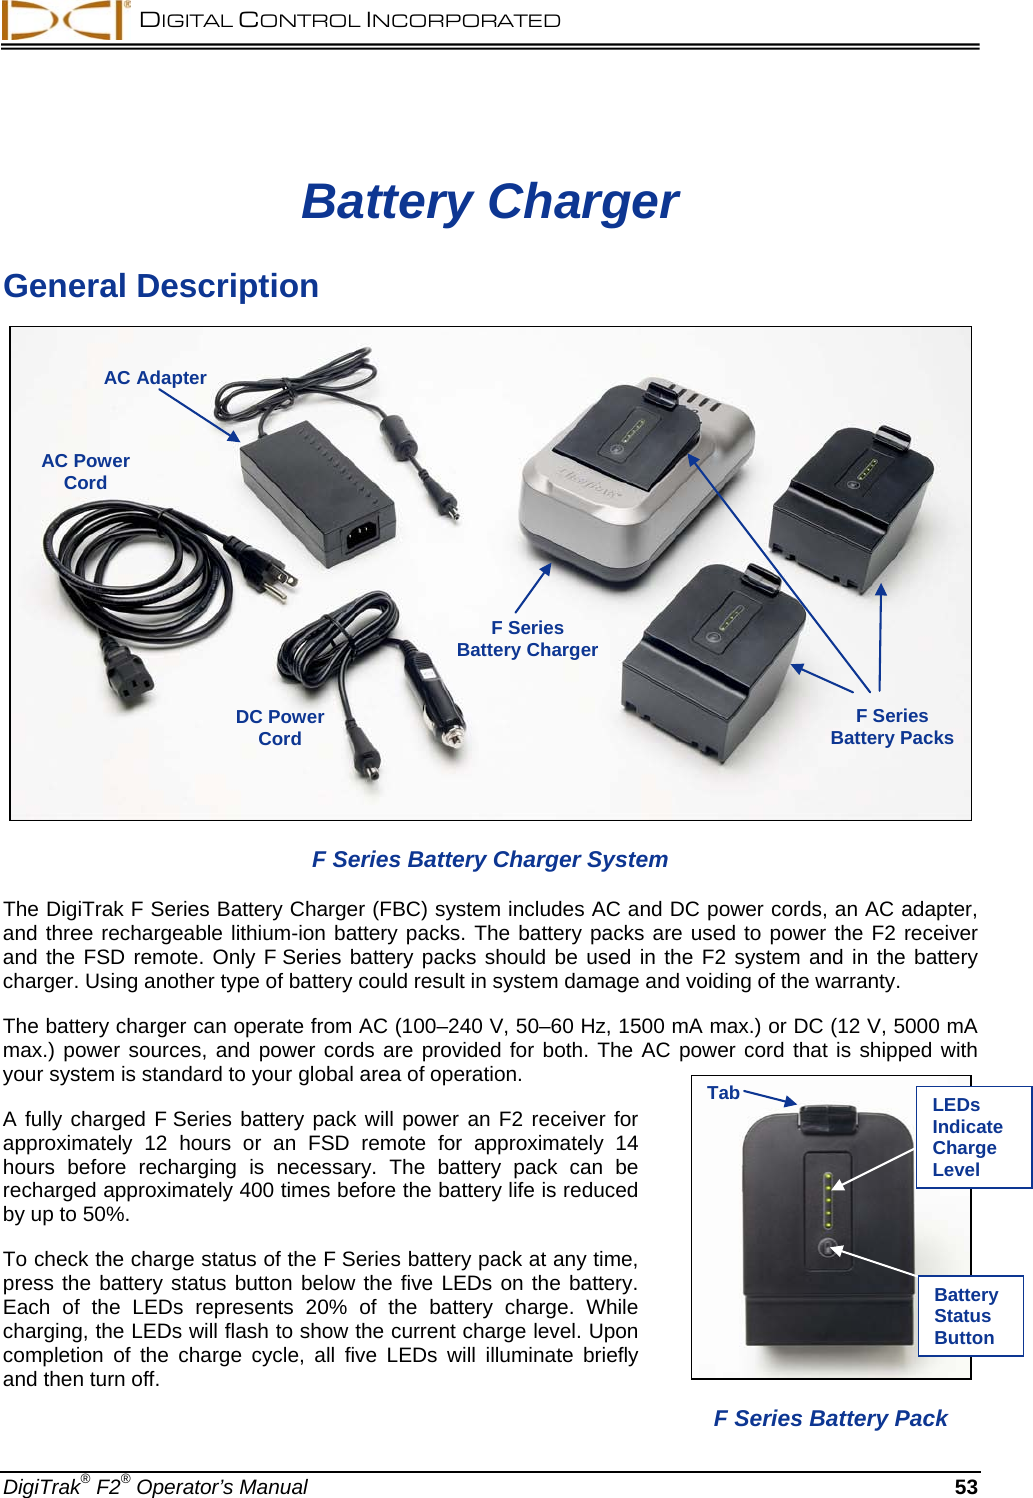  DIGITAL CONTROL INCORPORATED  DigiTrak® F2® Operator’s Manual 53 Battery Charger General Description  F Series Battery Charger System The DigiTrak F Series Battery Charger (FBC) system includes AC and DC power cords, an AC adapter, and three rechargeable lithium-ion battery packs. The battery packs are used to power the F2 receiver and the FSD remote. Only F Series battery packs should be used in the F2 system and in the battery charger. Using another type of battery could result in system damage and voiding of the warranty.  The battery charger can operate from AC (100–240 V, 50–60 Hz, 1500 mA max.) or DC (12 V, 5000 mA max.) power sources, and power cords are provided for both. The AC power cord that is shipped with your system is standard to your global area of operation. A fully charged F Series battery pack will power an F2 receiver for approximately 12 hours or an FSD remote for approximately 14 hours before recharging is necessary.  The battery pack can be recharged approximately 400 times before the battery life is reduced by up to 50%. To check the charge status of the F Series battery pack at any time, press the battery status button below the five LEDs on the battery. Each of the LEDs represents 20% of the battery charge.  While charging, the LEDs will flash to show the current charge level. Upon completion of the charge cycle, all five LEDs will illuminate briefly and then turn off.  AC Adapter AC Power Cord F Series  Battery Charger F Series  Battery Packs  DC Power Cord   F Series Battery Pack Tab LEDs Indicate Charge Level Battery Status Button 